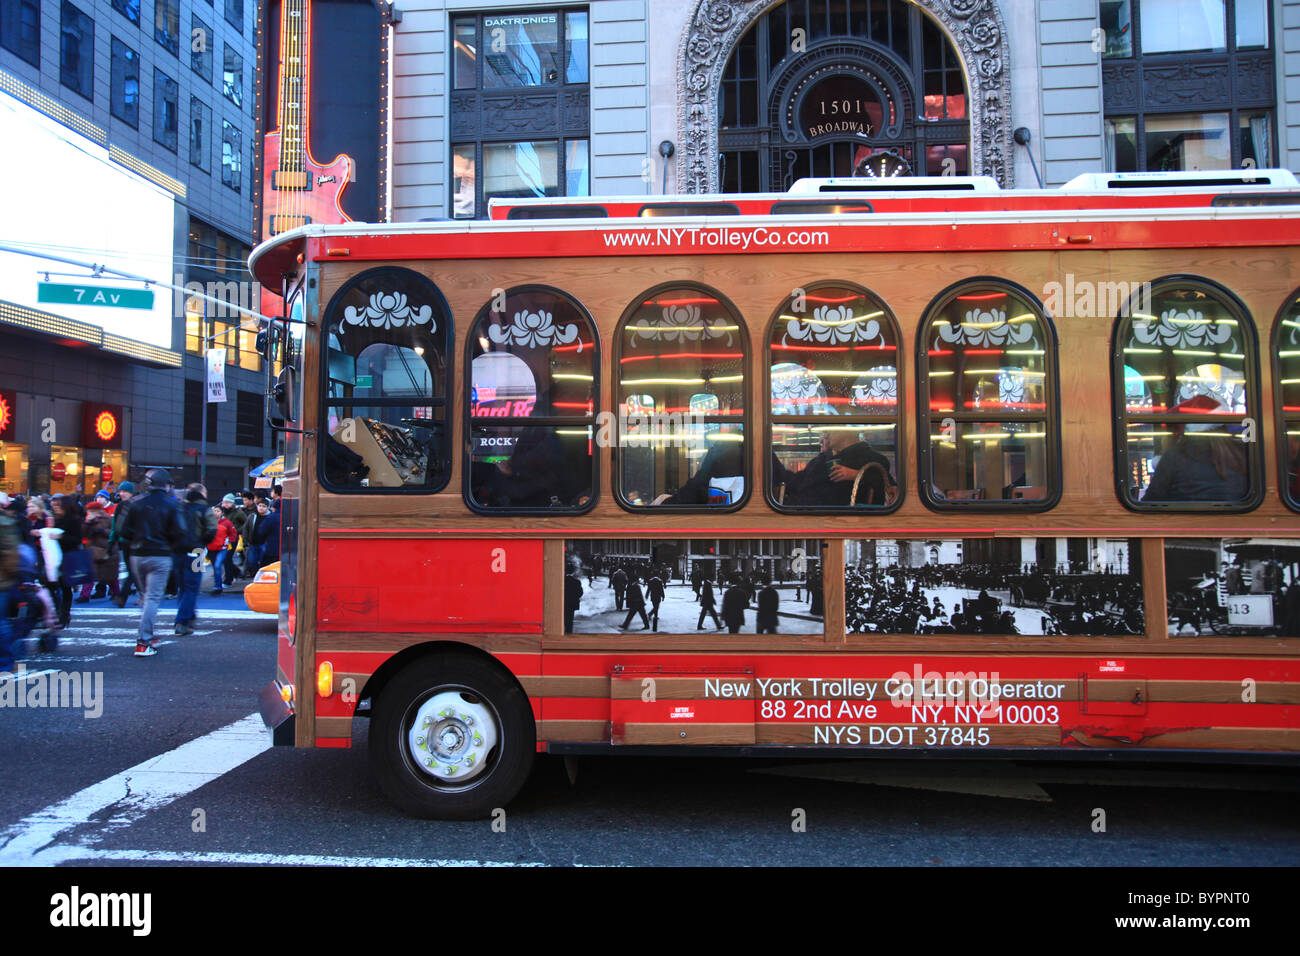 Two storey sightseeing bus stopping at an intersection in Times square New York city 2010 Stock Photo